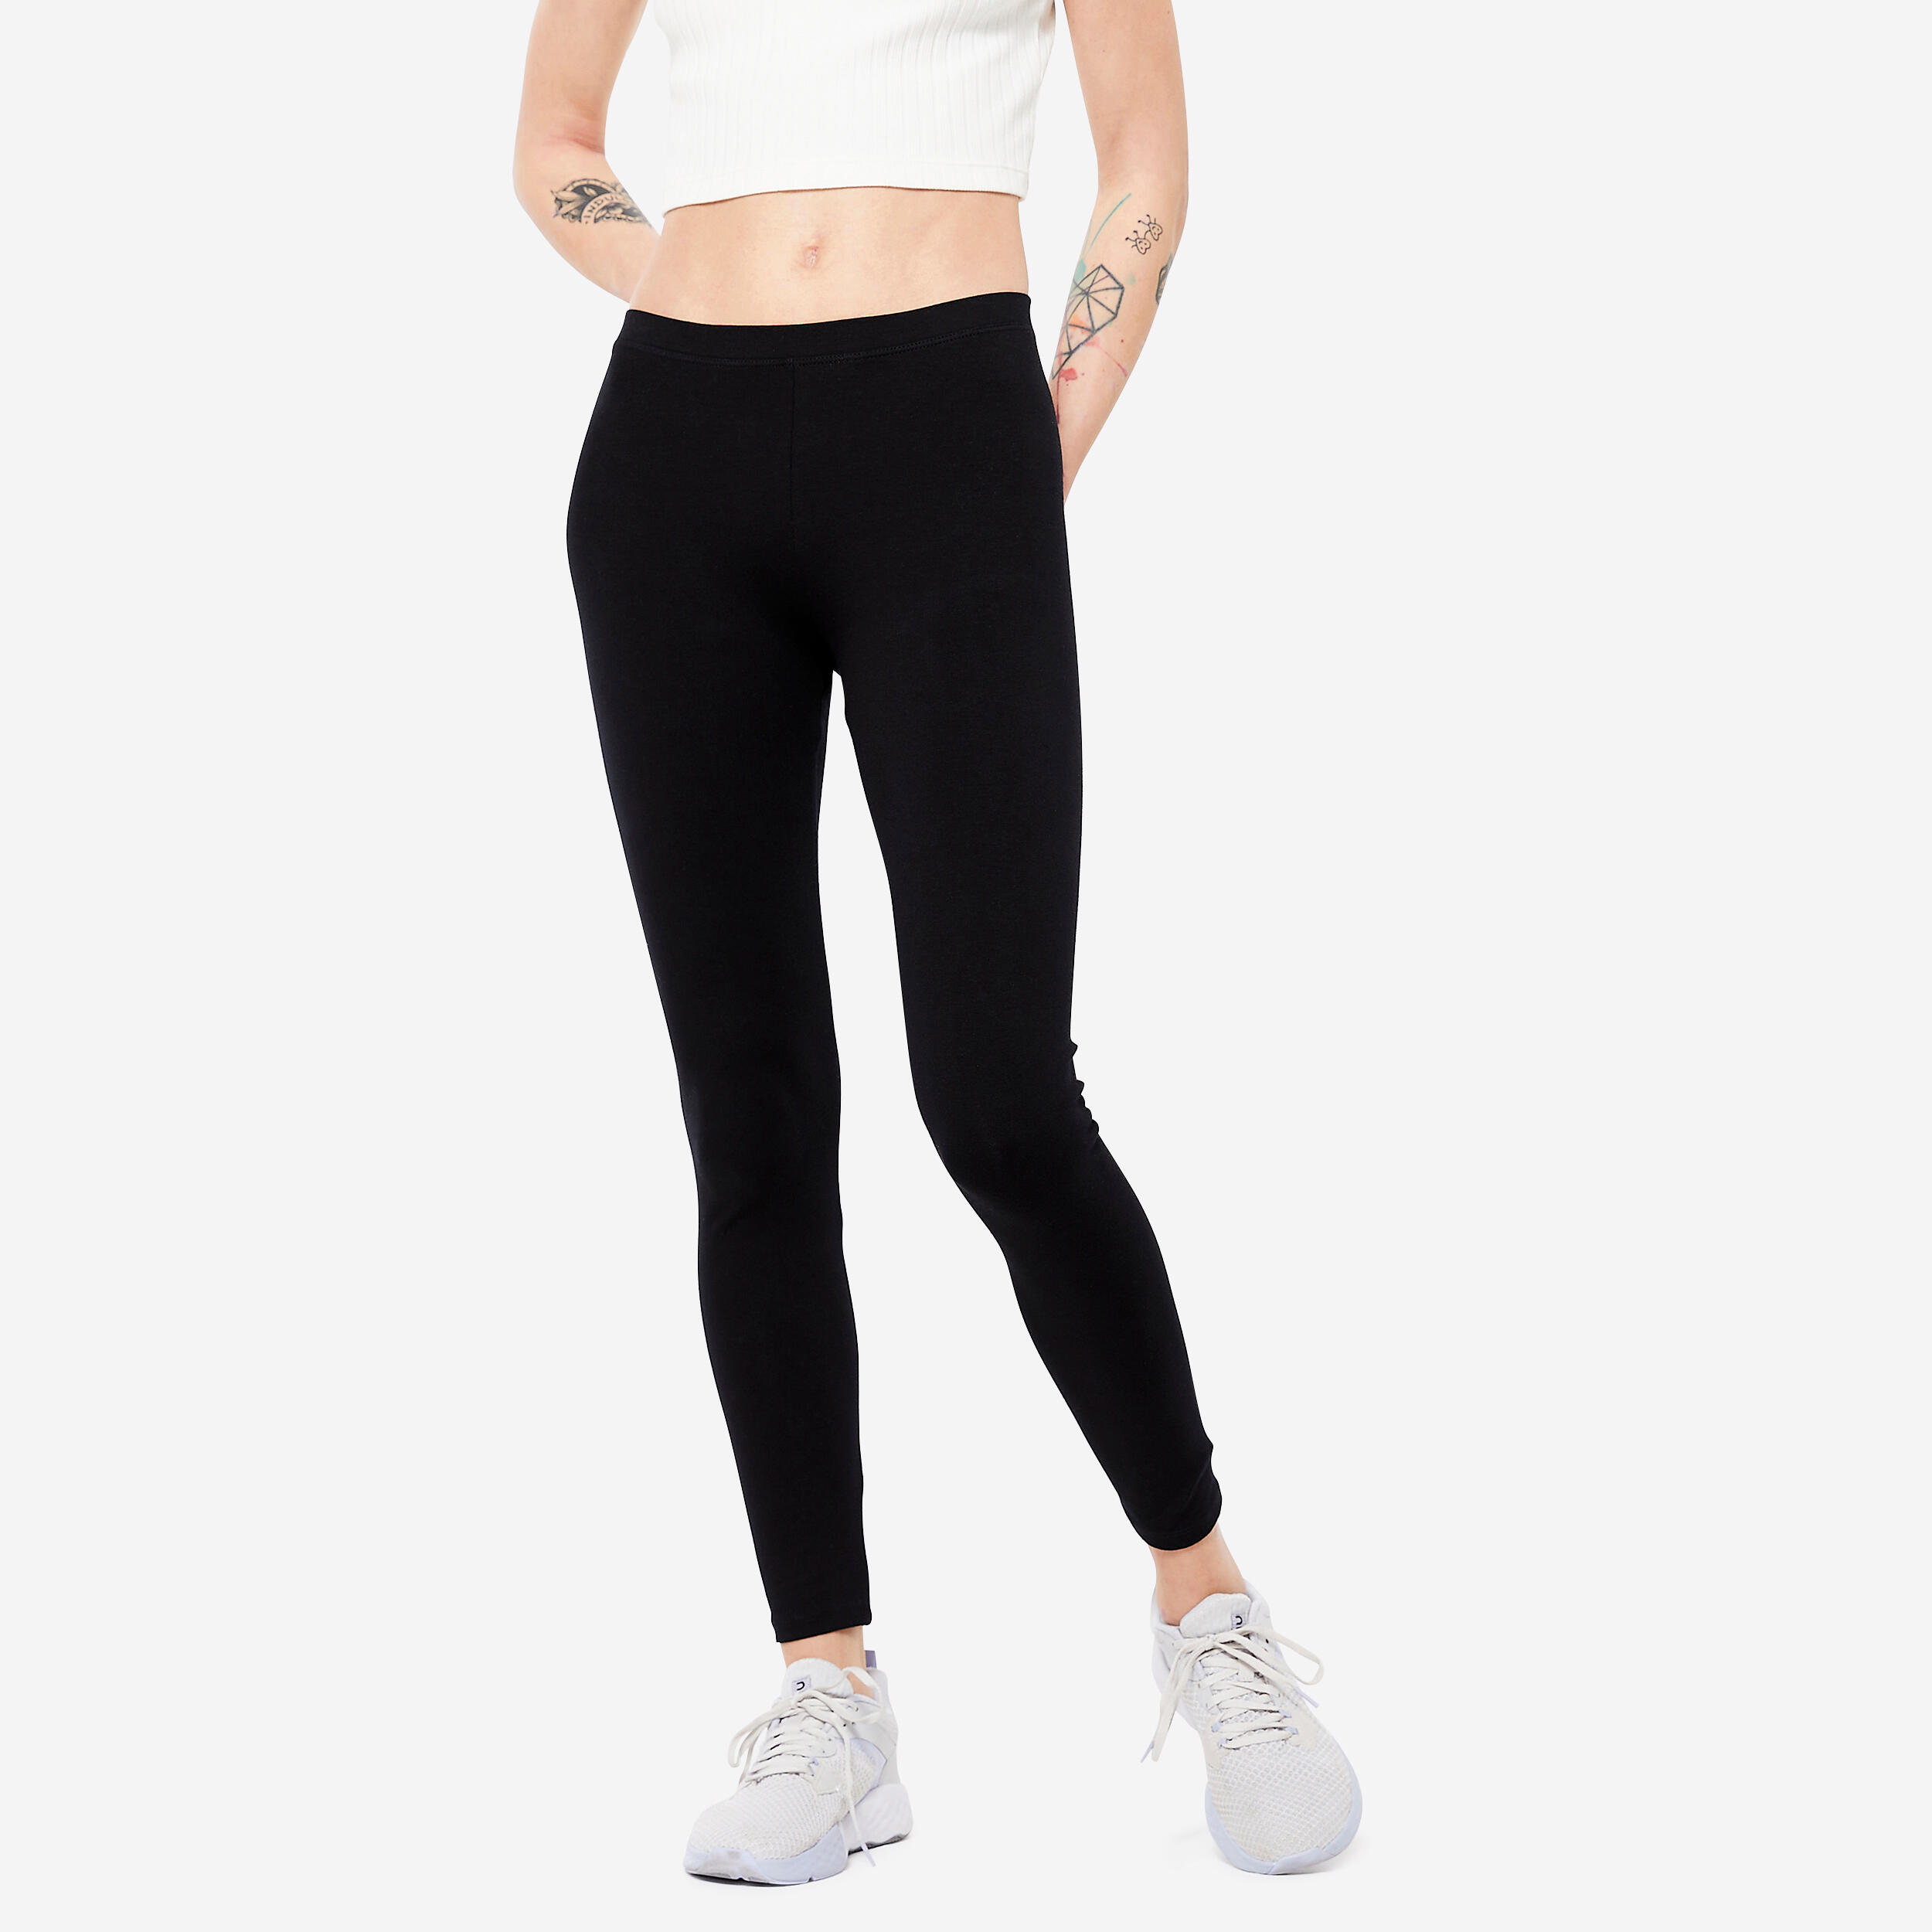 Trulfit Leggings Womens Black Workout Cotton Pull On Slim Fit Size 3X | eBay